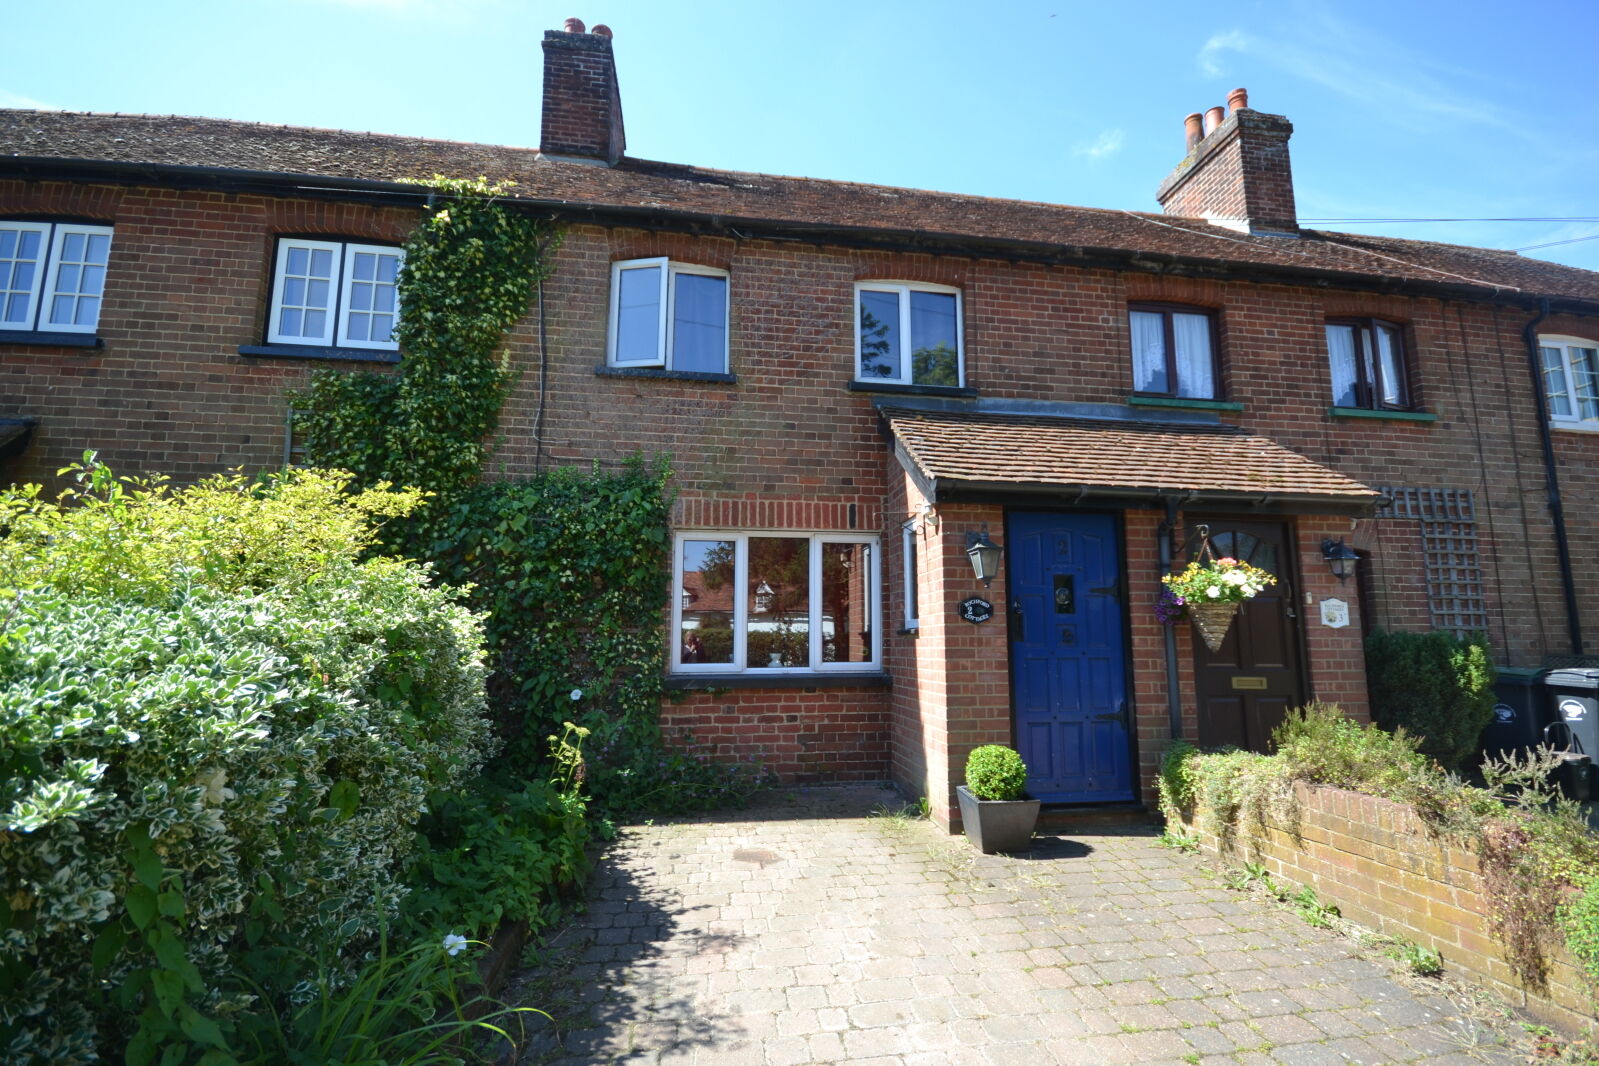 2 bedroom mid terraced house for sale Burton End, Stansted, CM24, main image